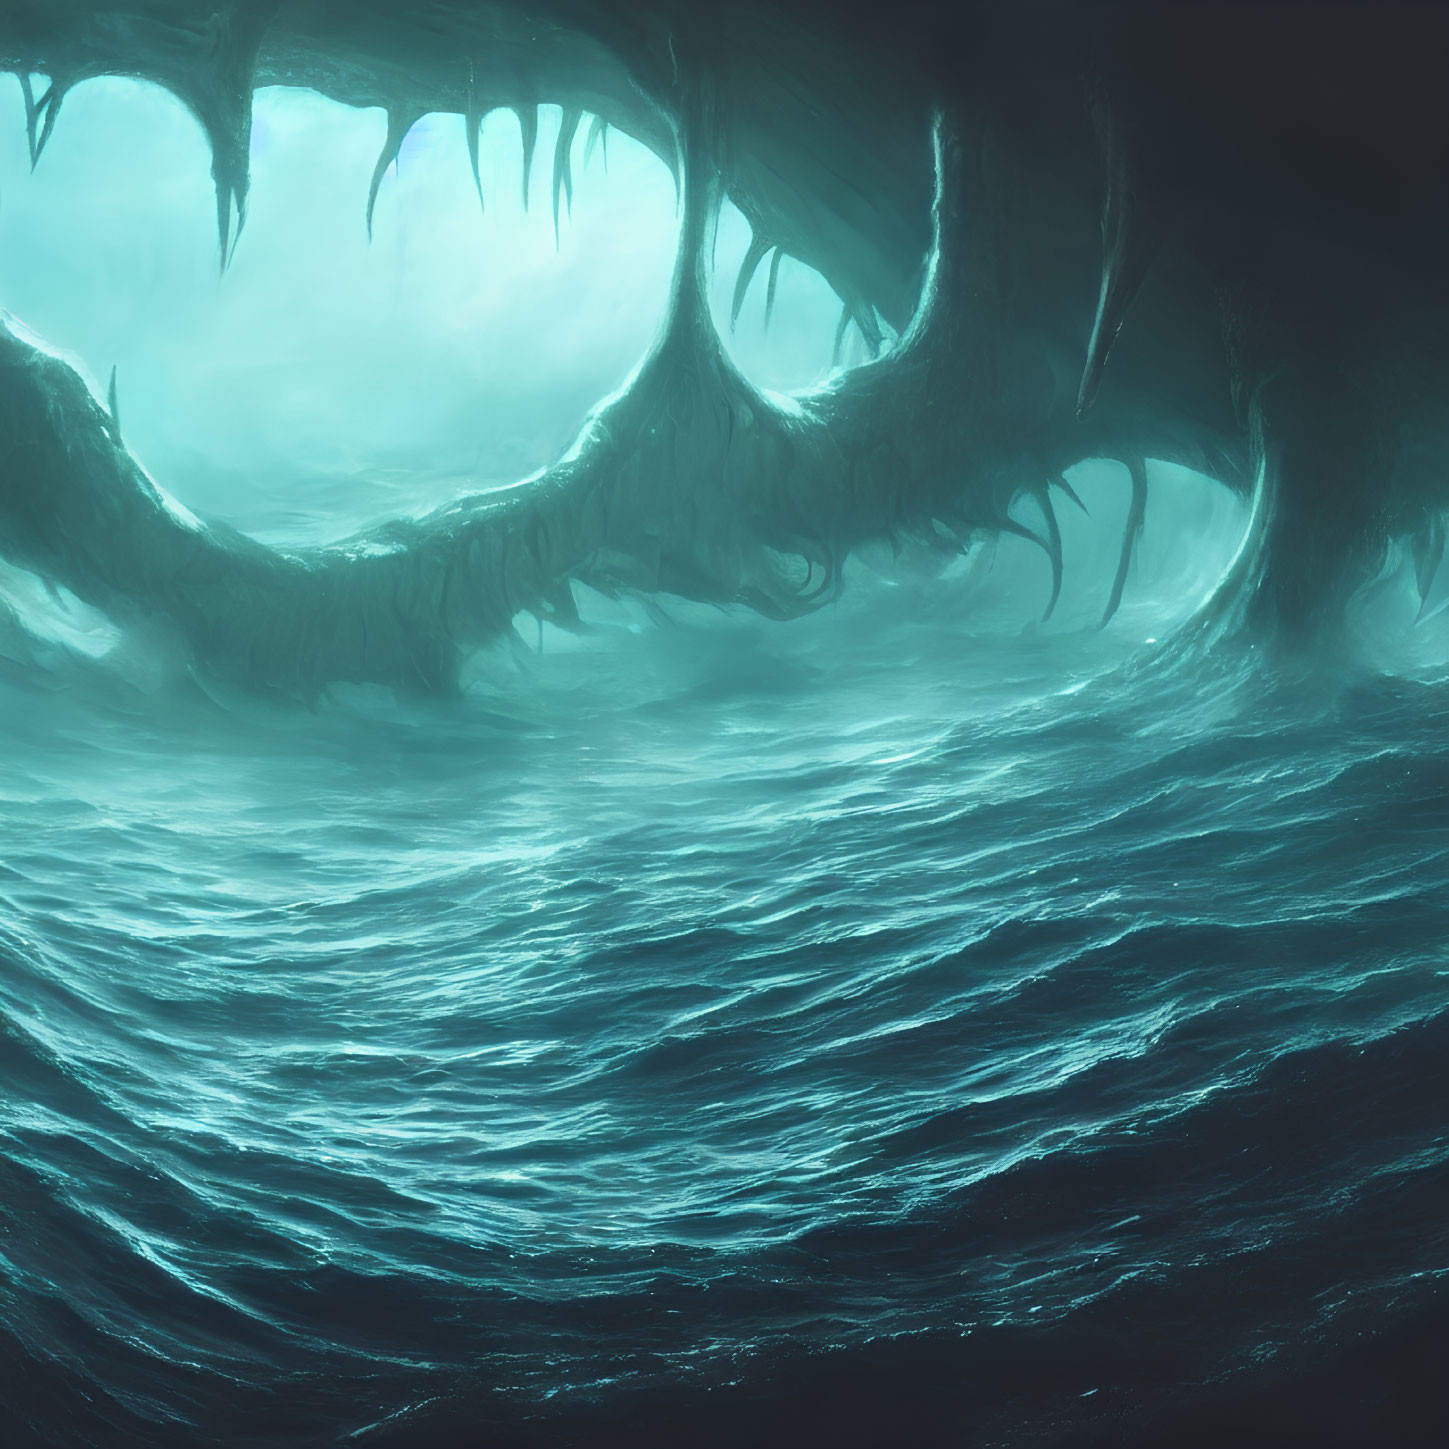 Eerie Underwater Scene with Tooth-Like Structures in Blue-Green Ambiance